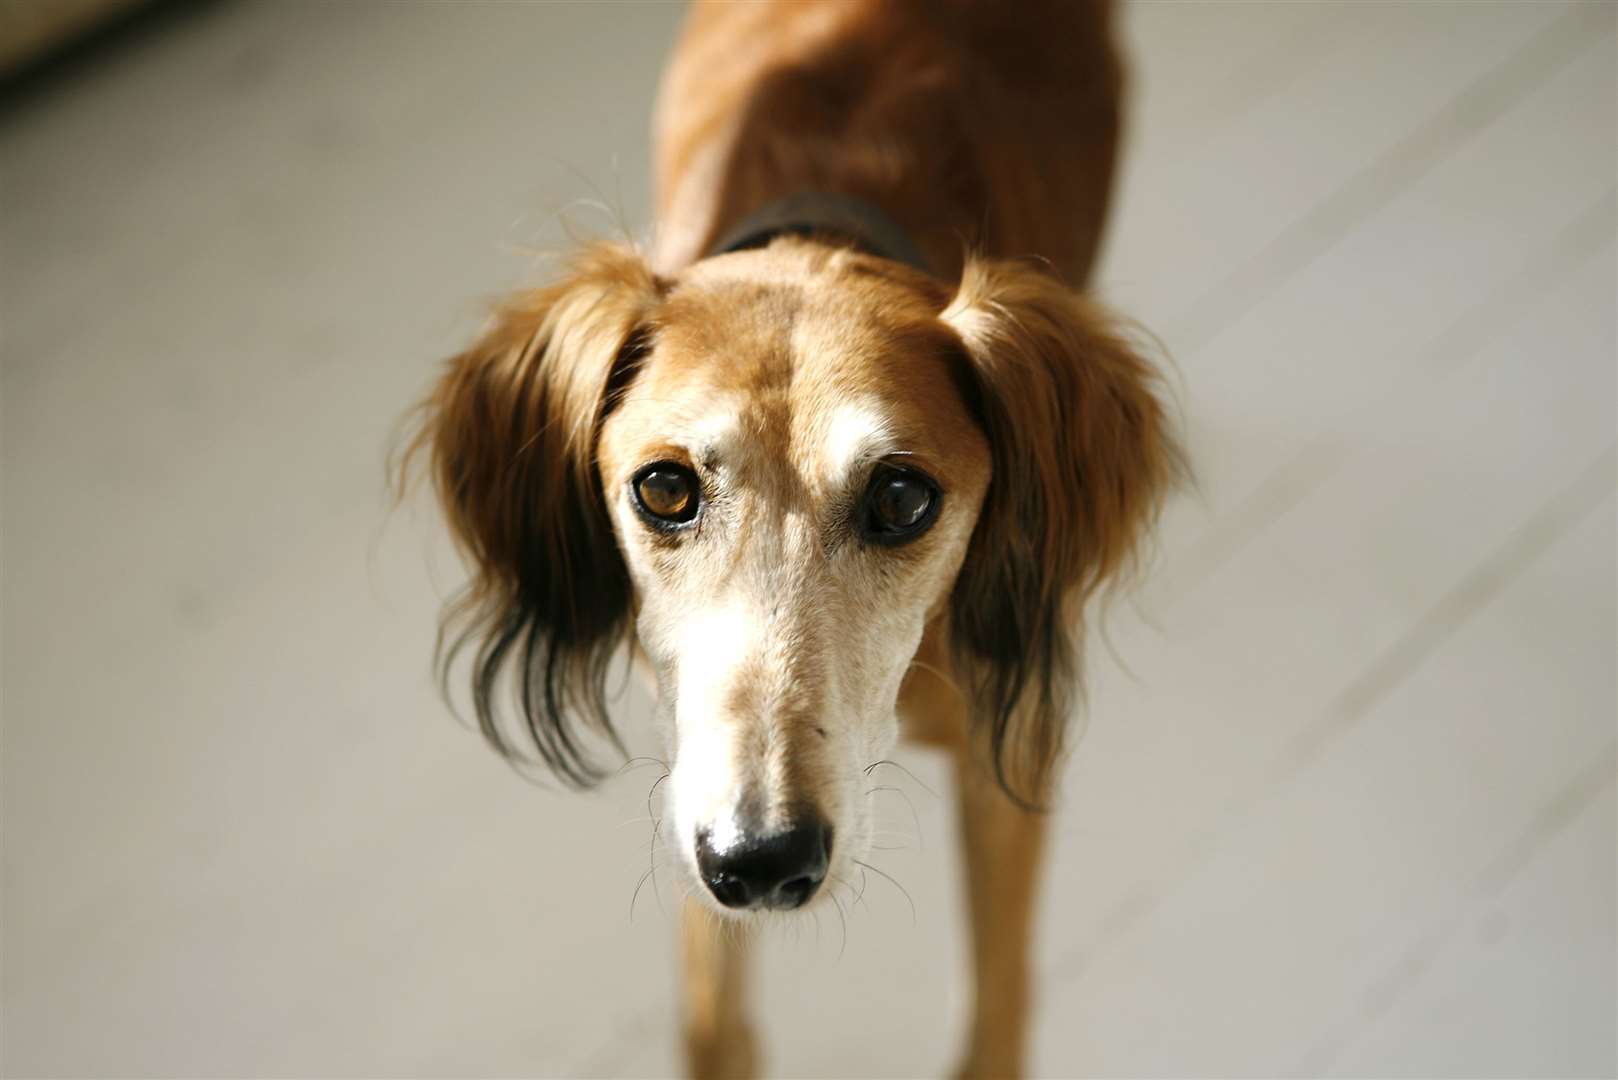 The dog involved was a Saluki. Stock image